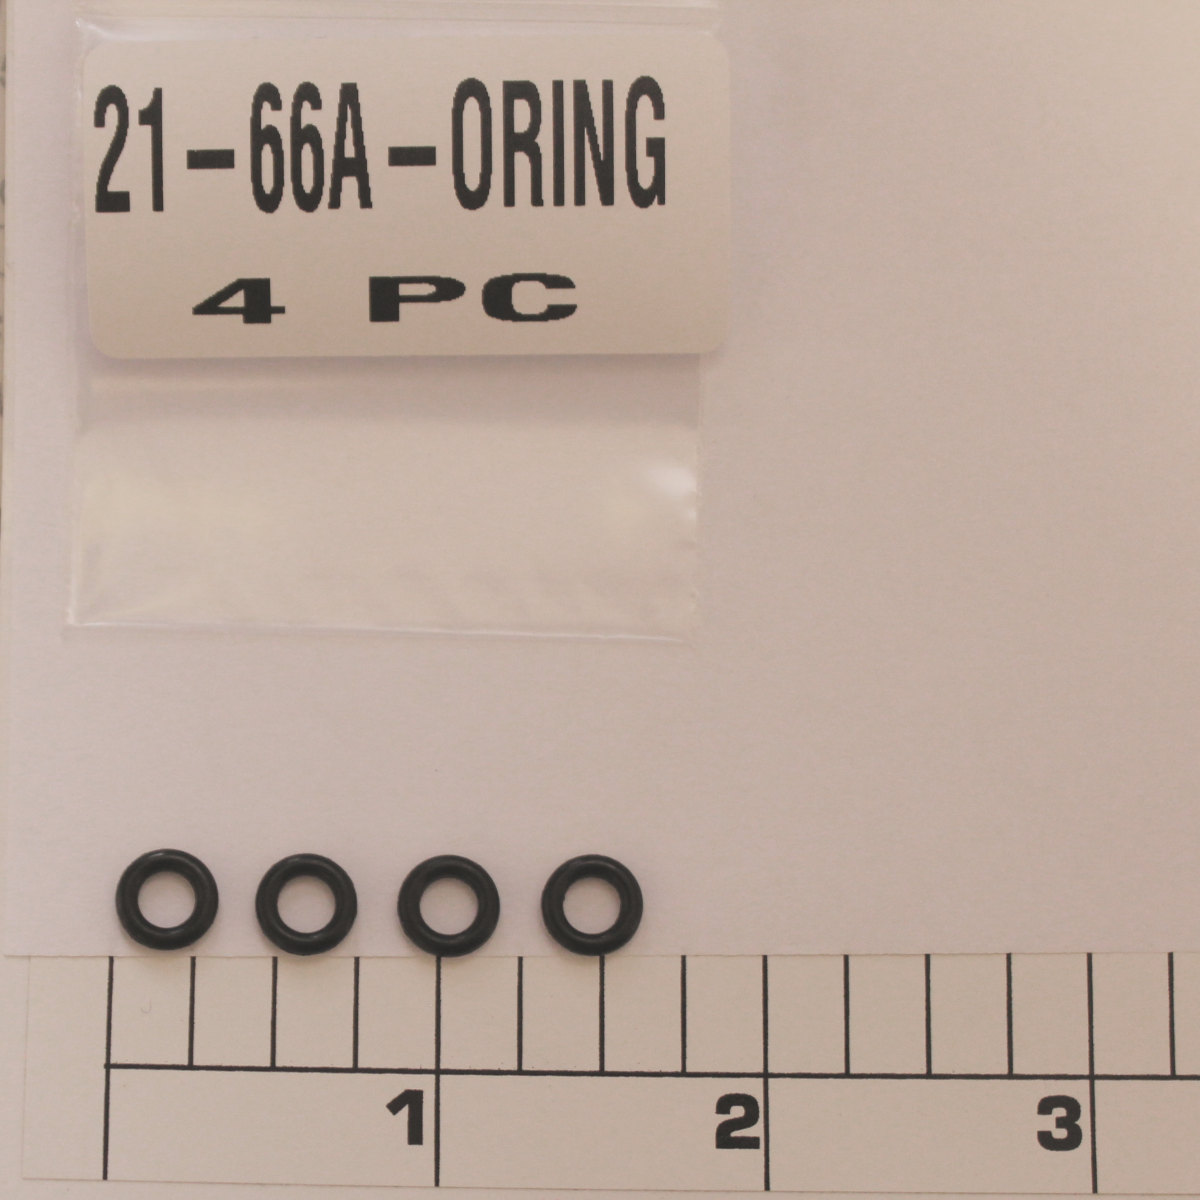 21-66A-ORING O-ring for the Custom Lever 4pk